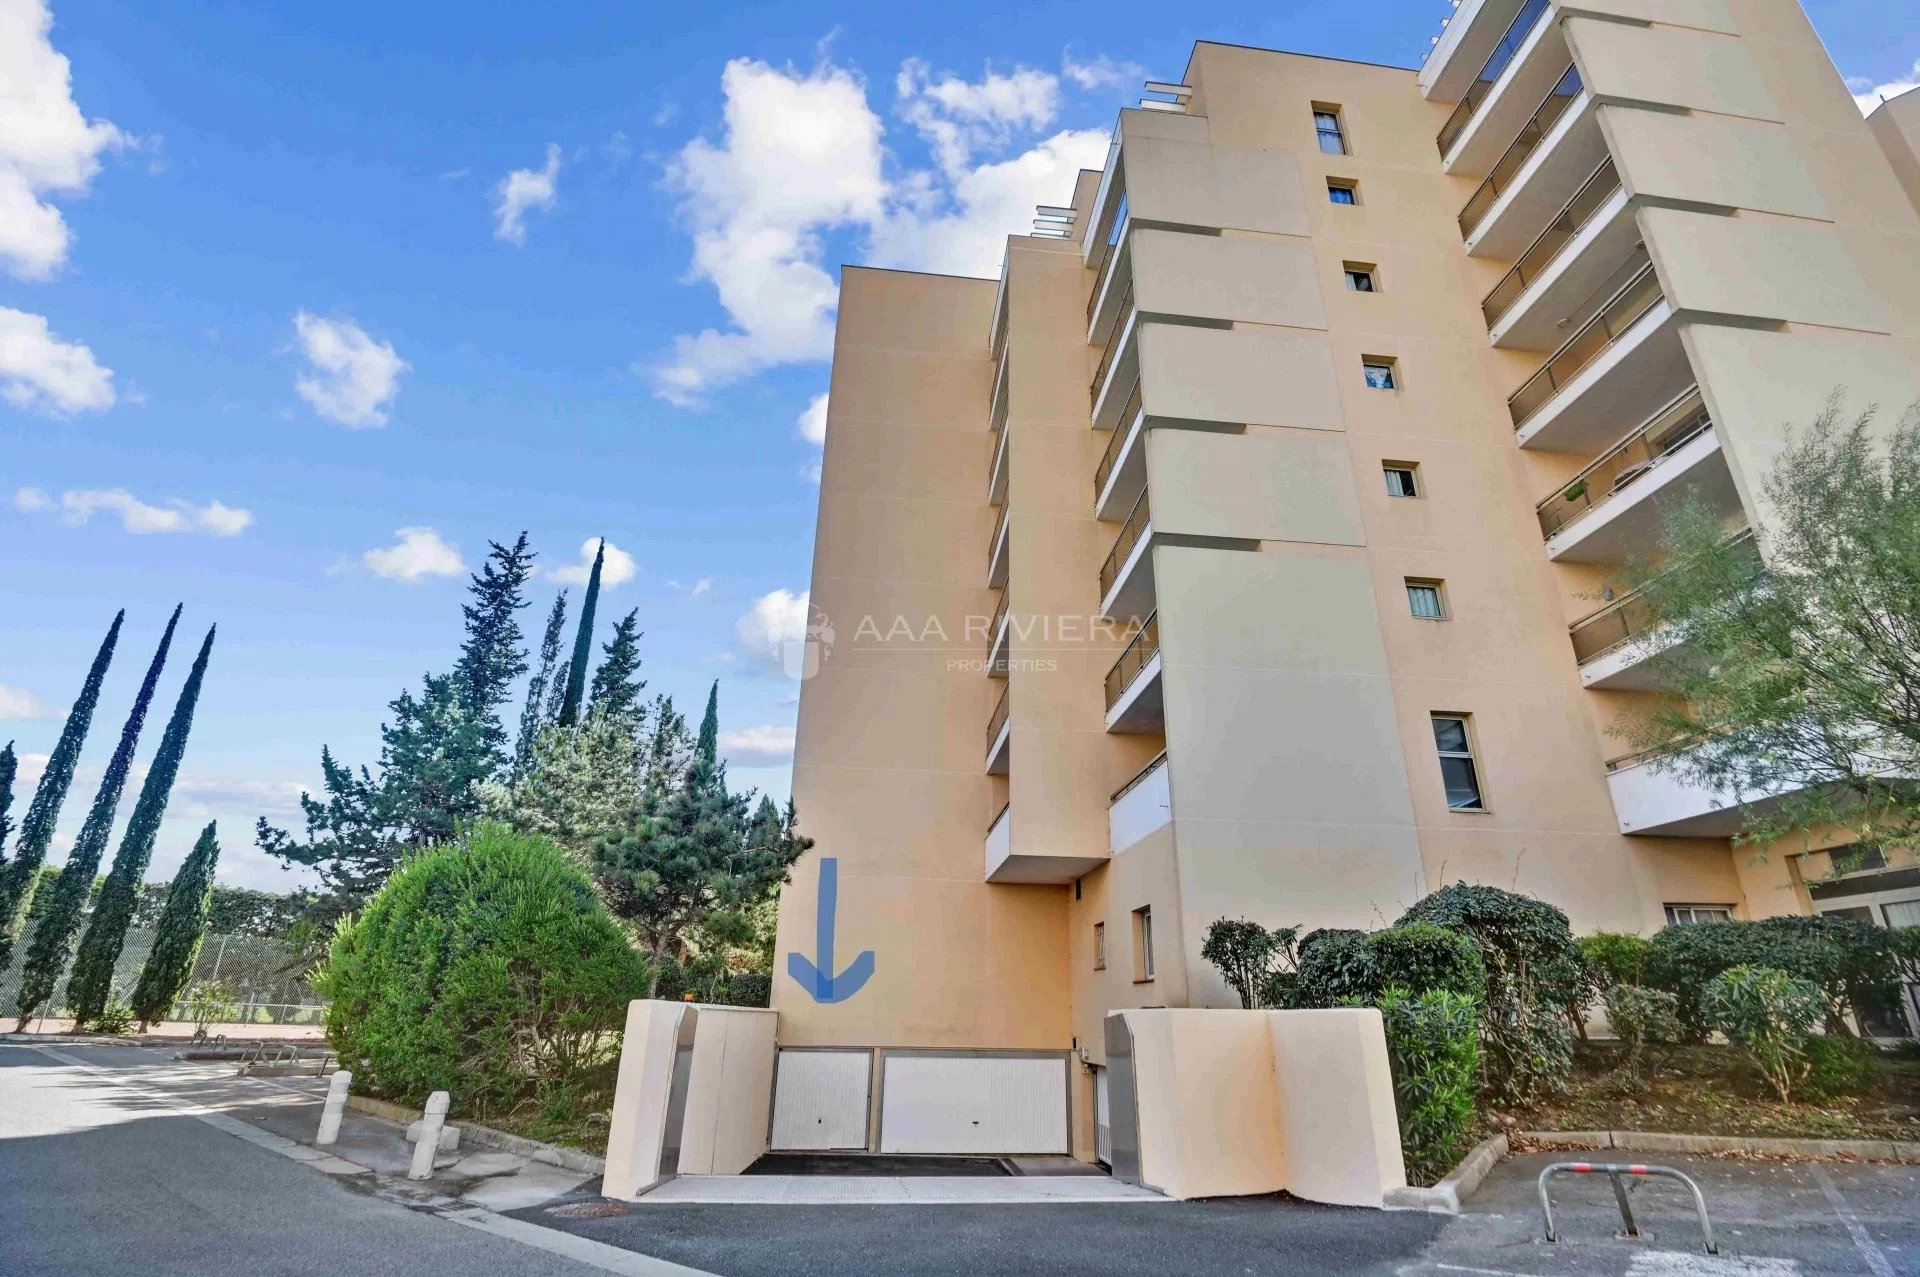 SOLD - SOLE AGENT - Mandelieu Cannes Marina -  Nice 2 bedroom apartment with big terrace and view in resdience with pool, tennis and cartaker